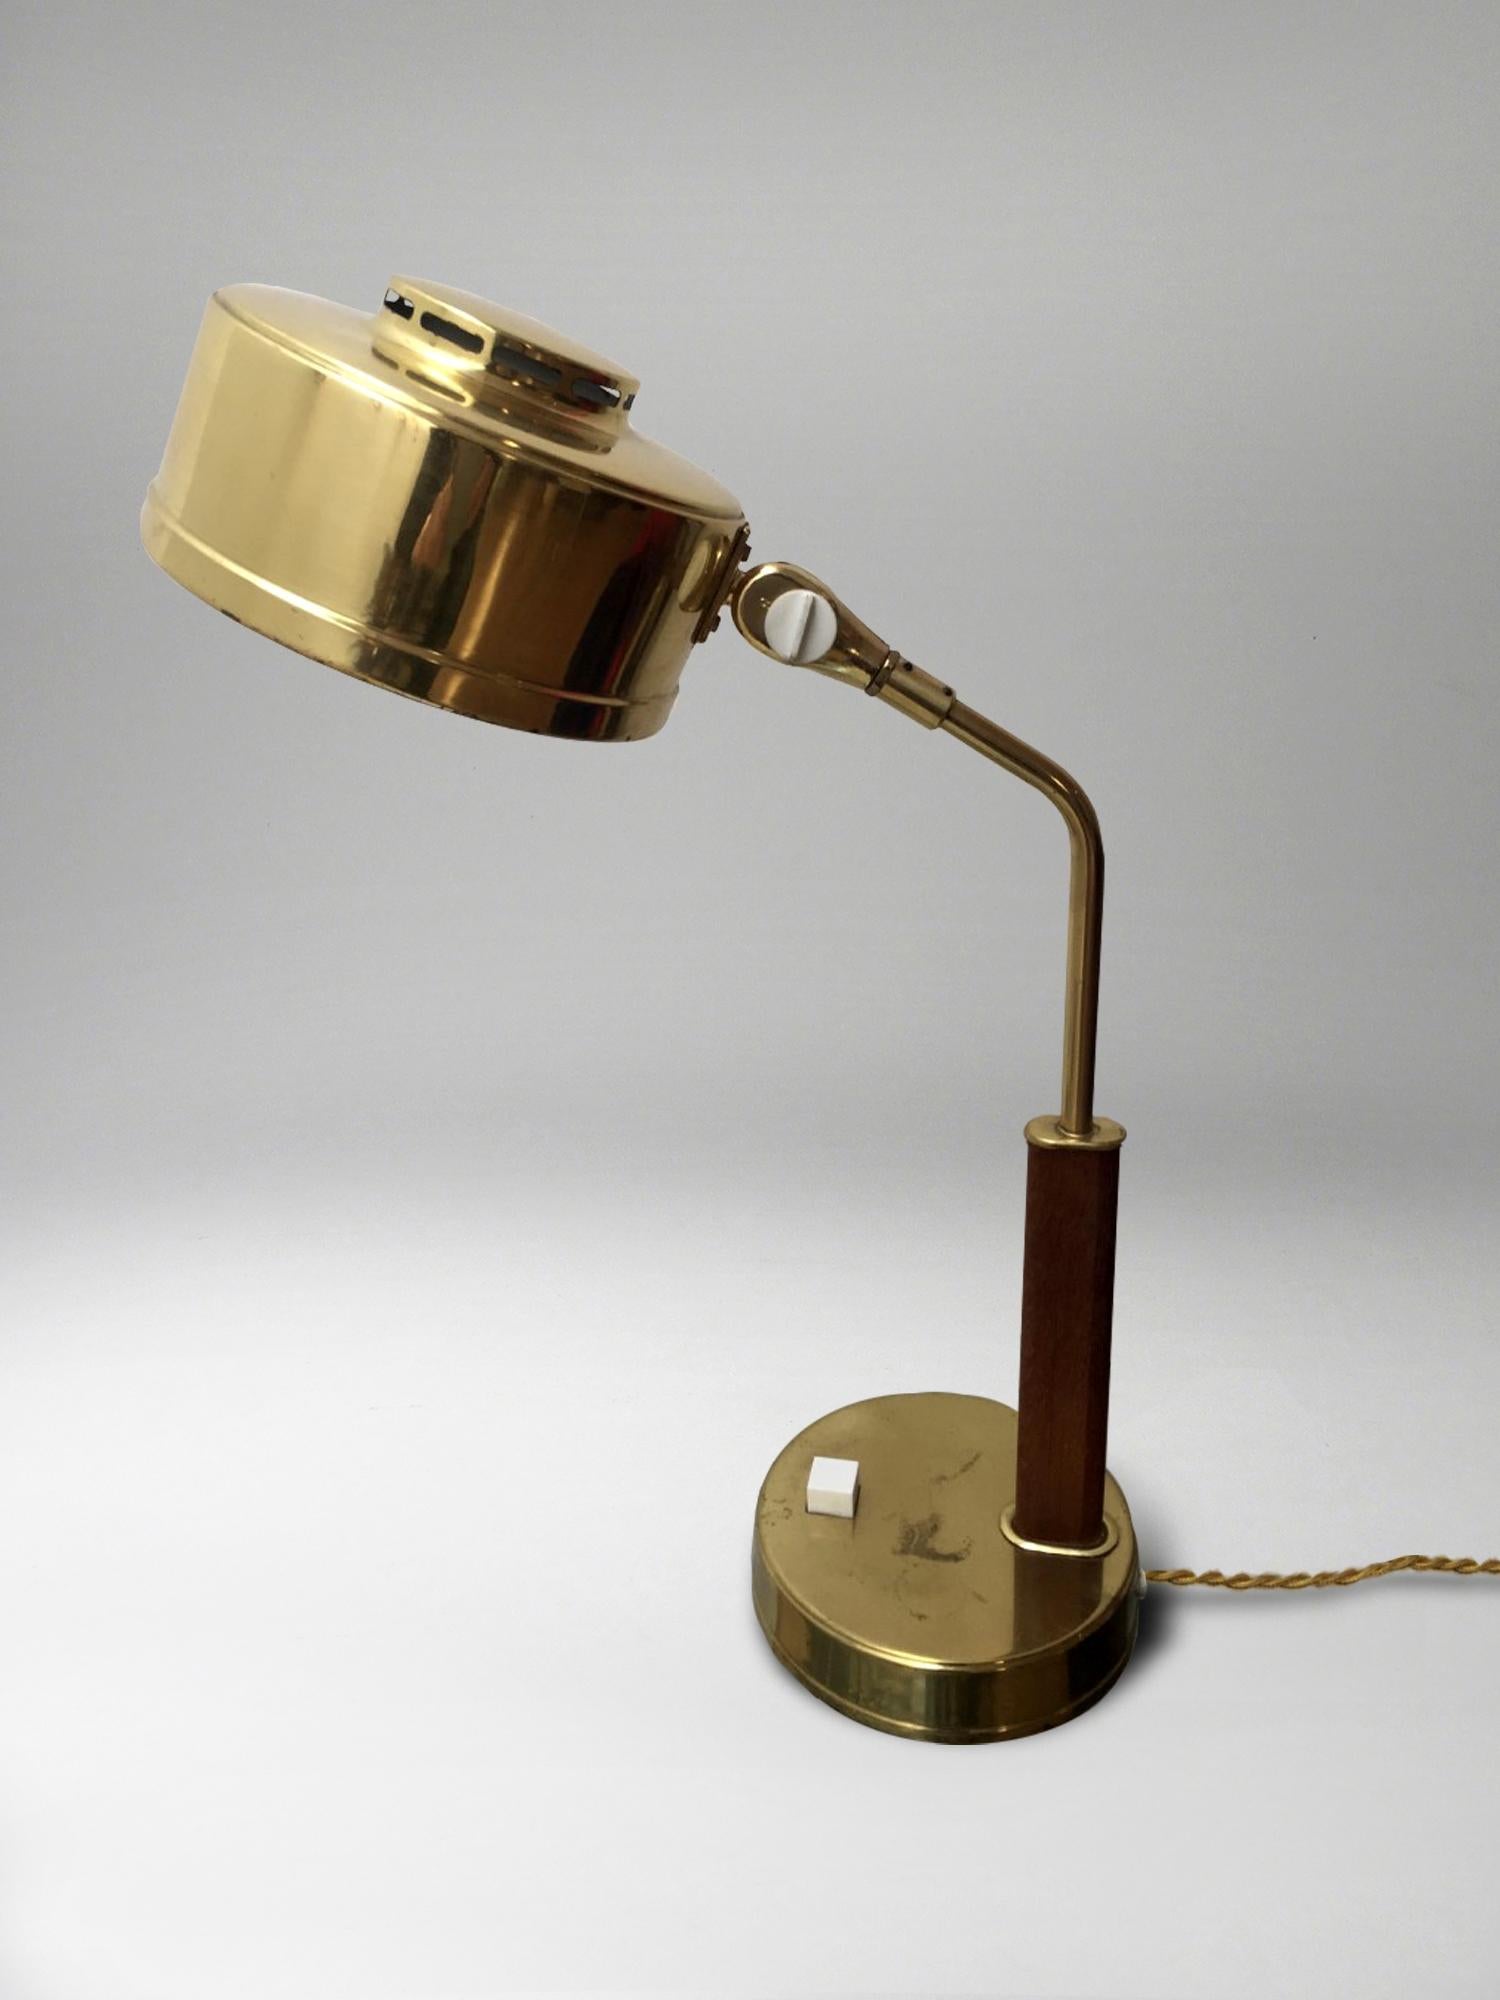 Handsome pair of desk lamps in brass and wood, with pivoting shades
by Bröderna Johansson Auto-Metallfabrik., Skellefteå (BJS), Model 51/M.
Each with stamped marks 'BJS Skellefteå Sweden' and with 'S' paper label.

Founded in 1946, BJS was owned